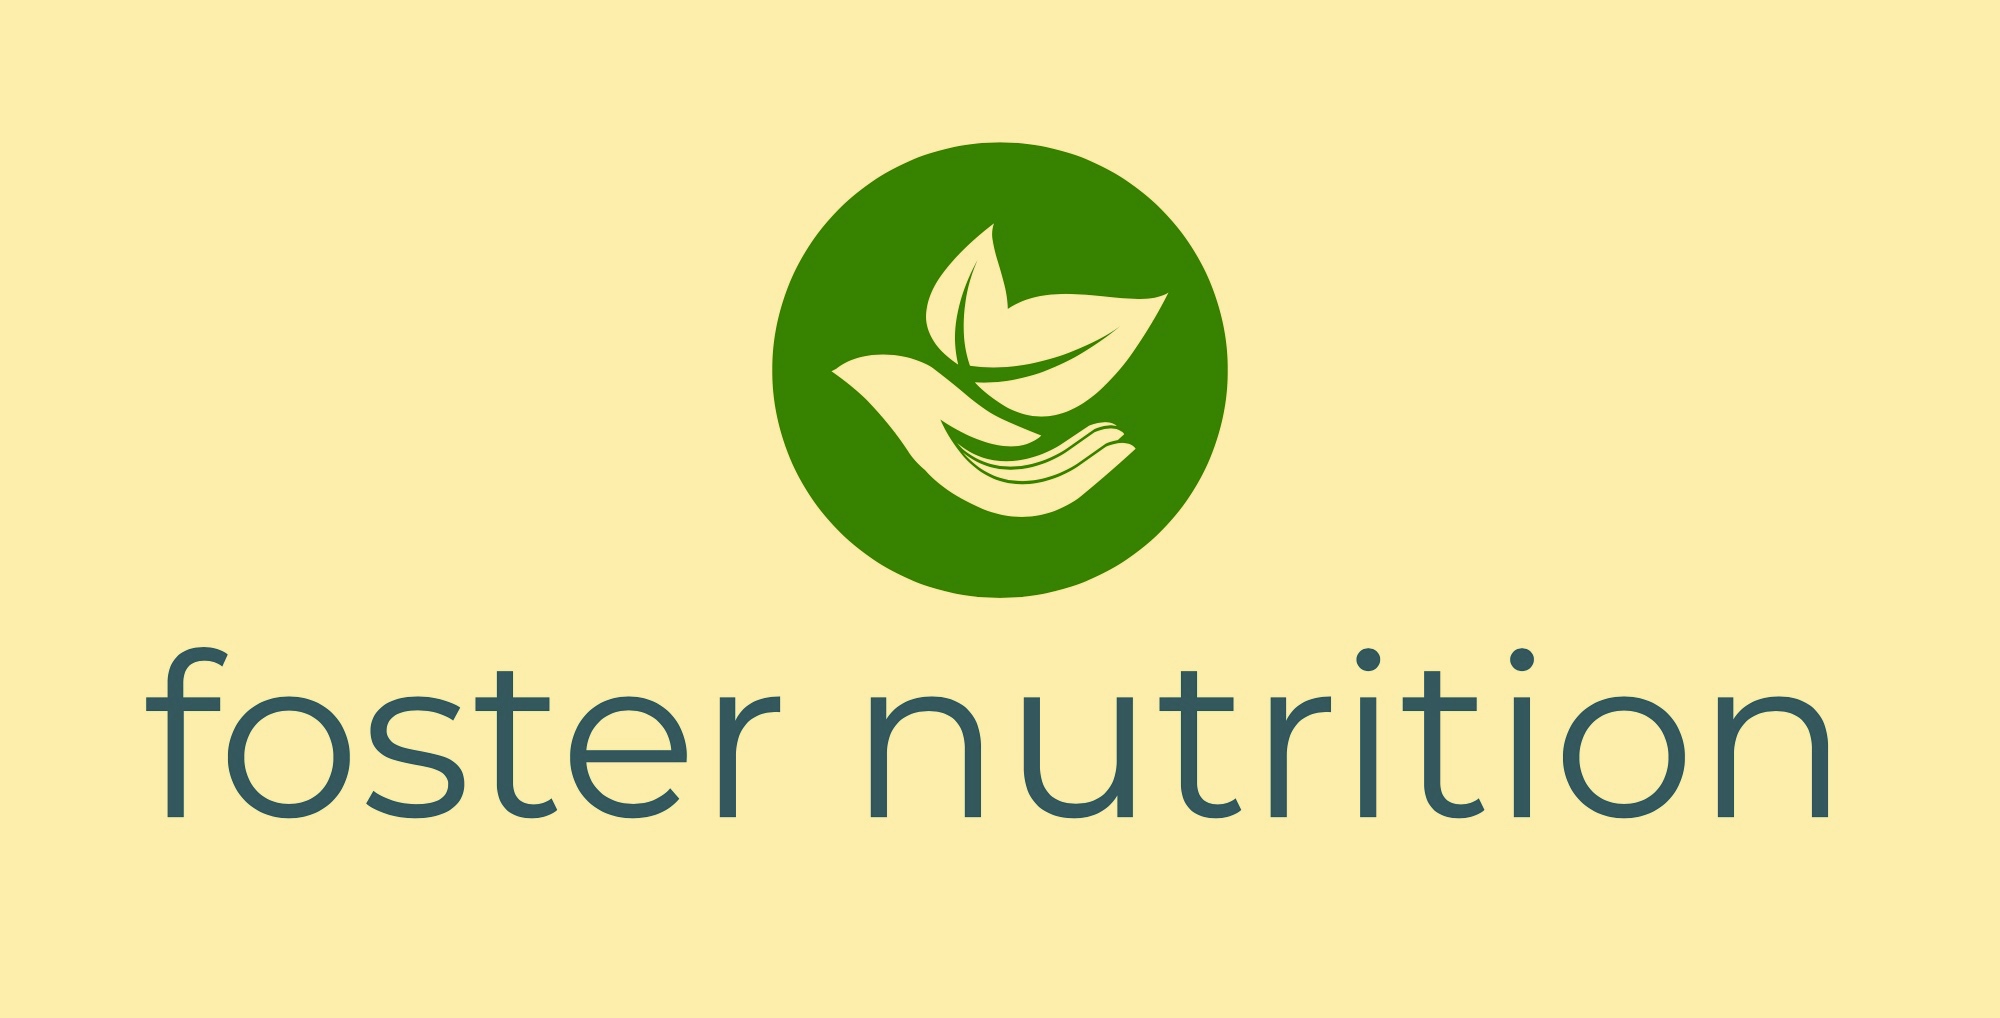 FOSTER NUTRITION